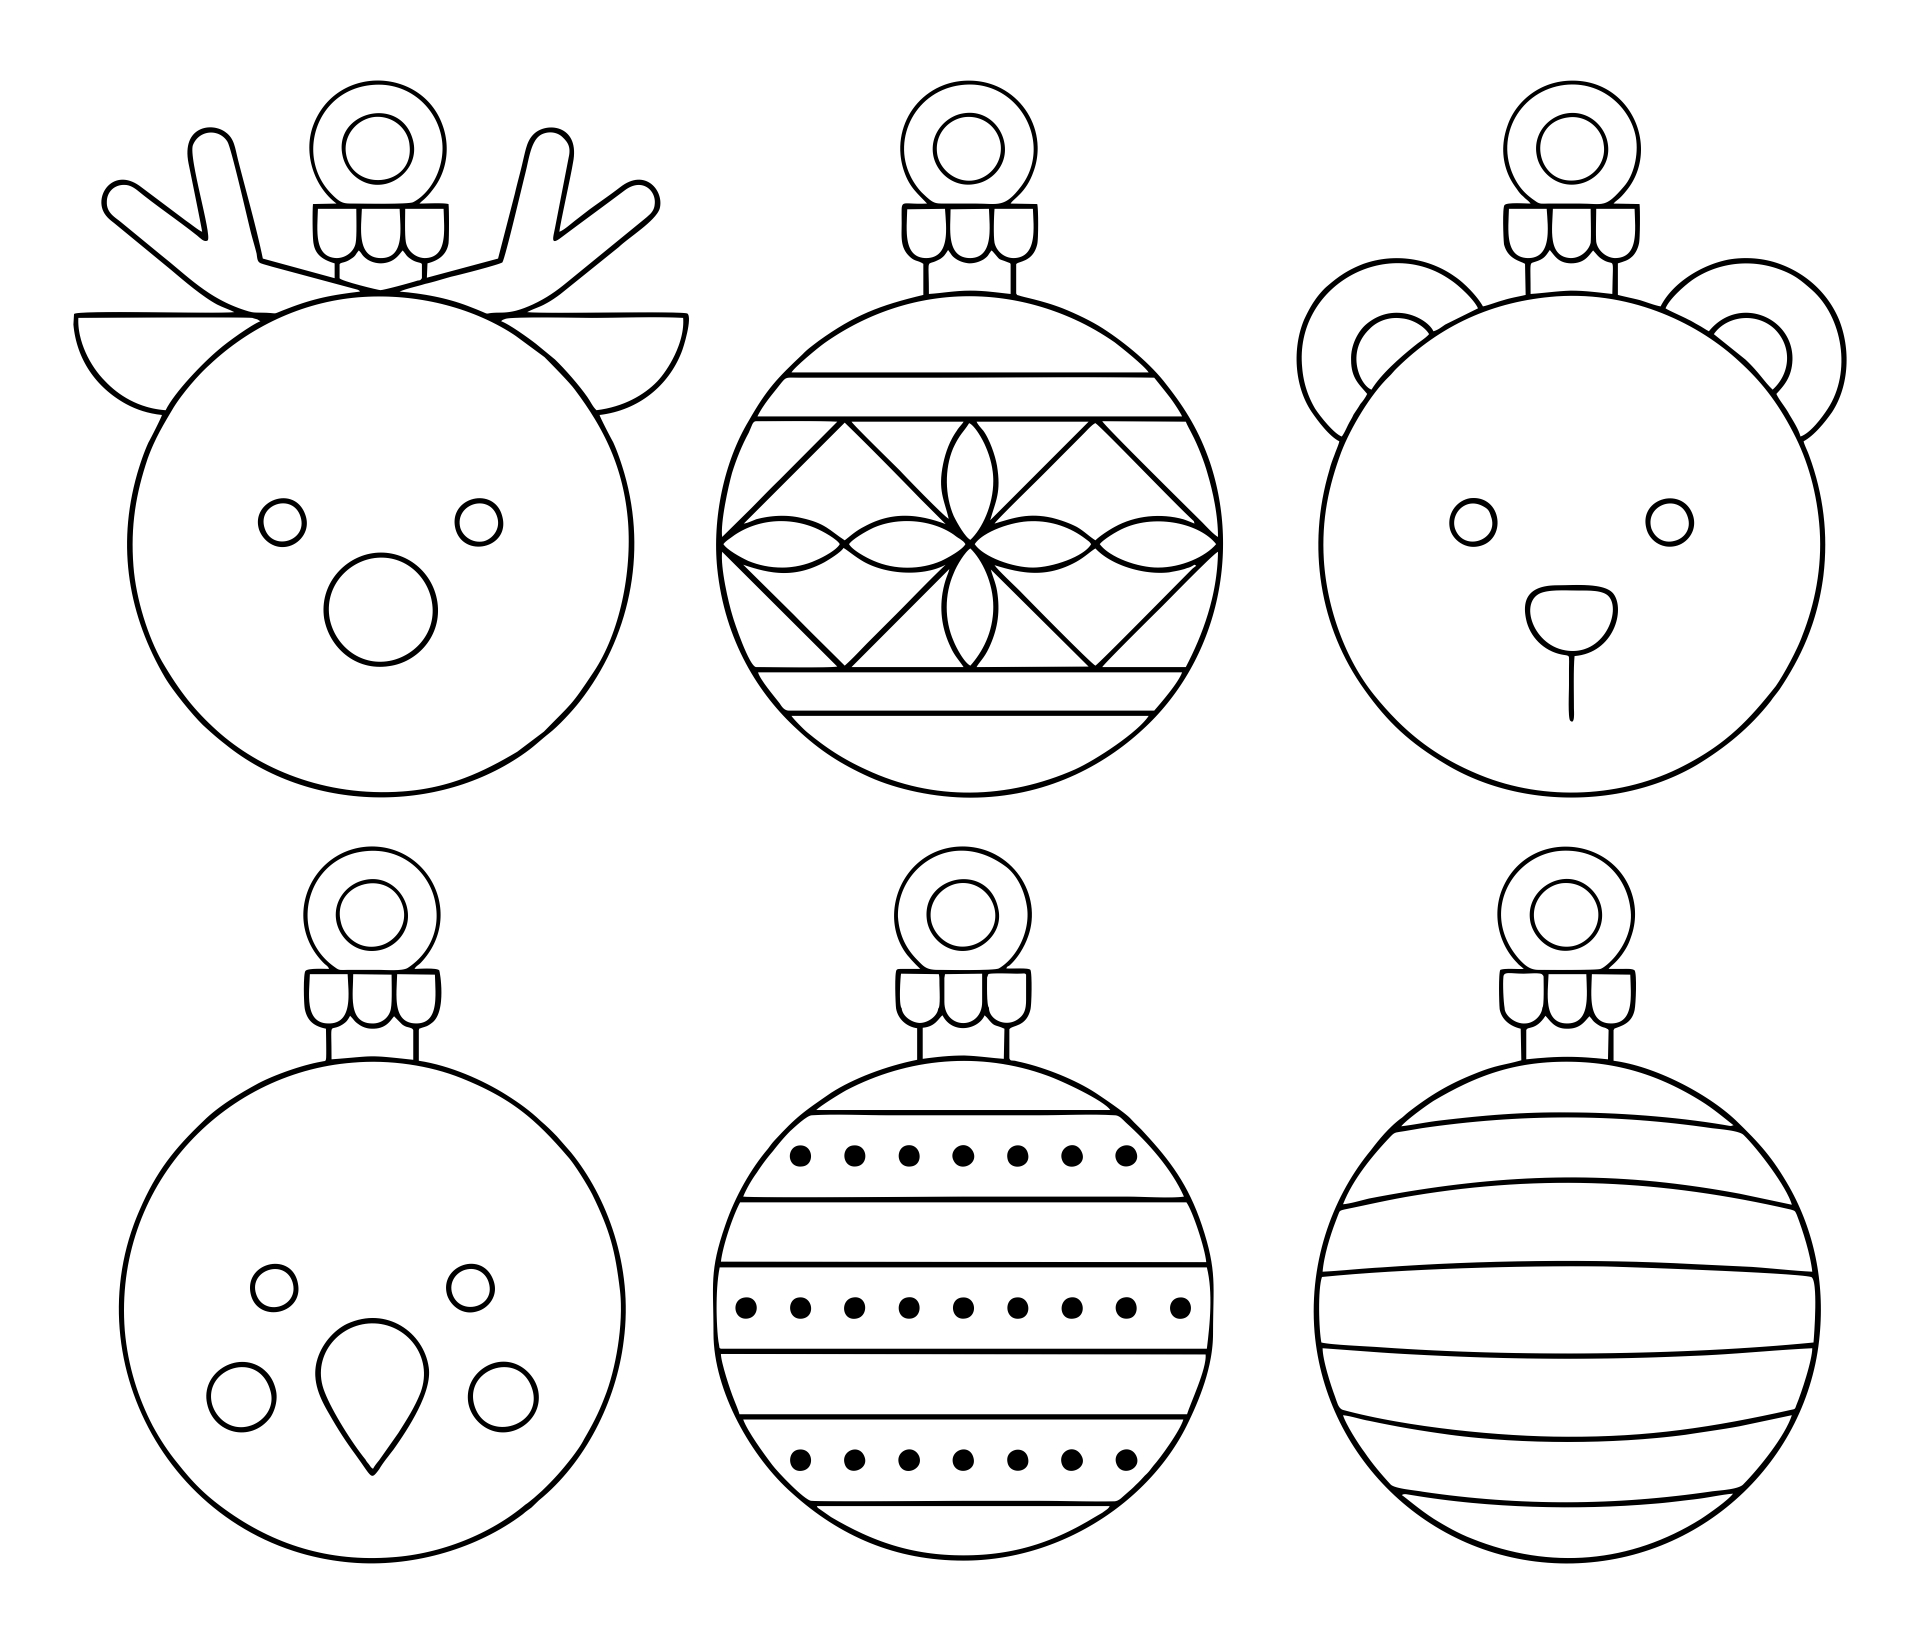 15-best-free-printable-christmas-ornament-templates-pdf-for-free-at